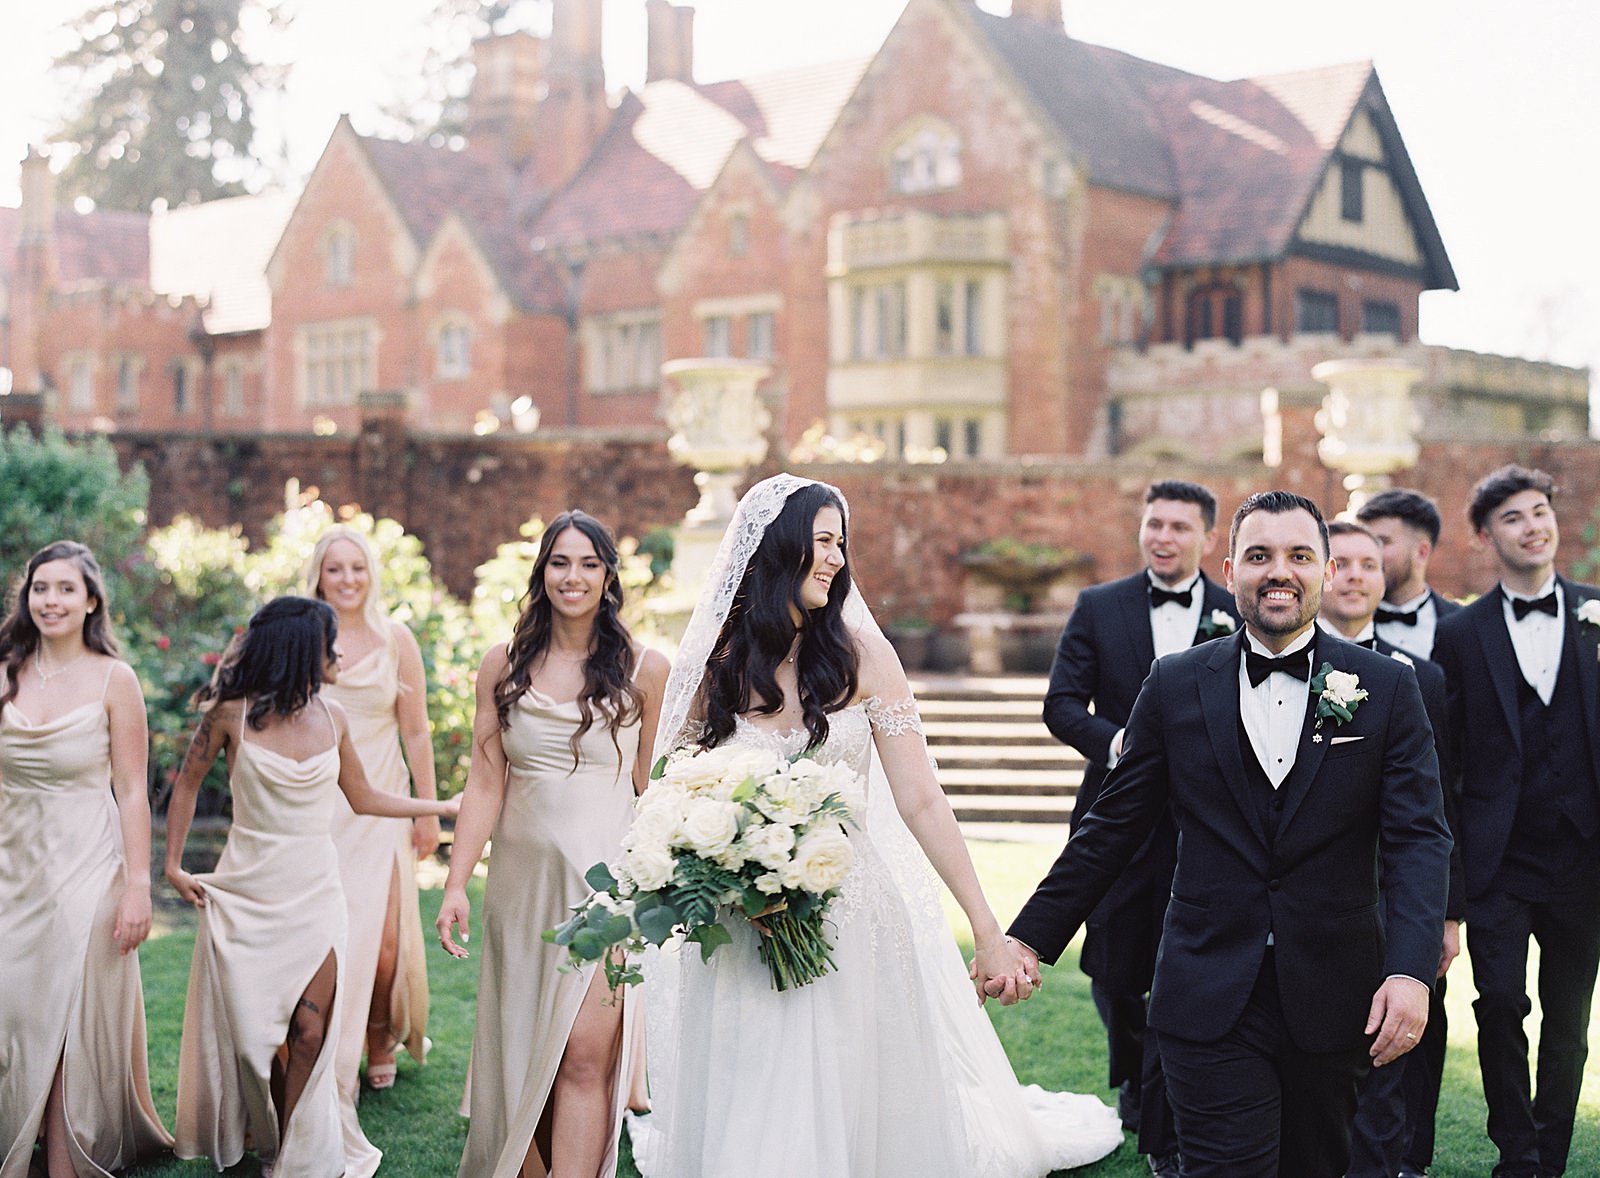 Bridal party with bride and groom walking in front of Thornewood Castle - Jacqueline Benét Photography